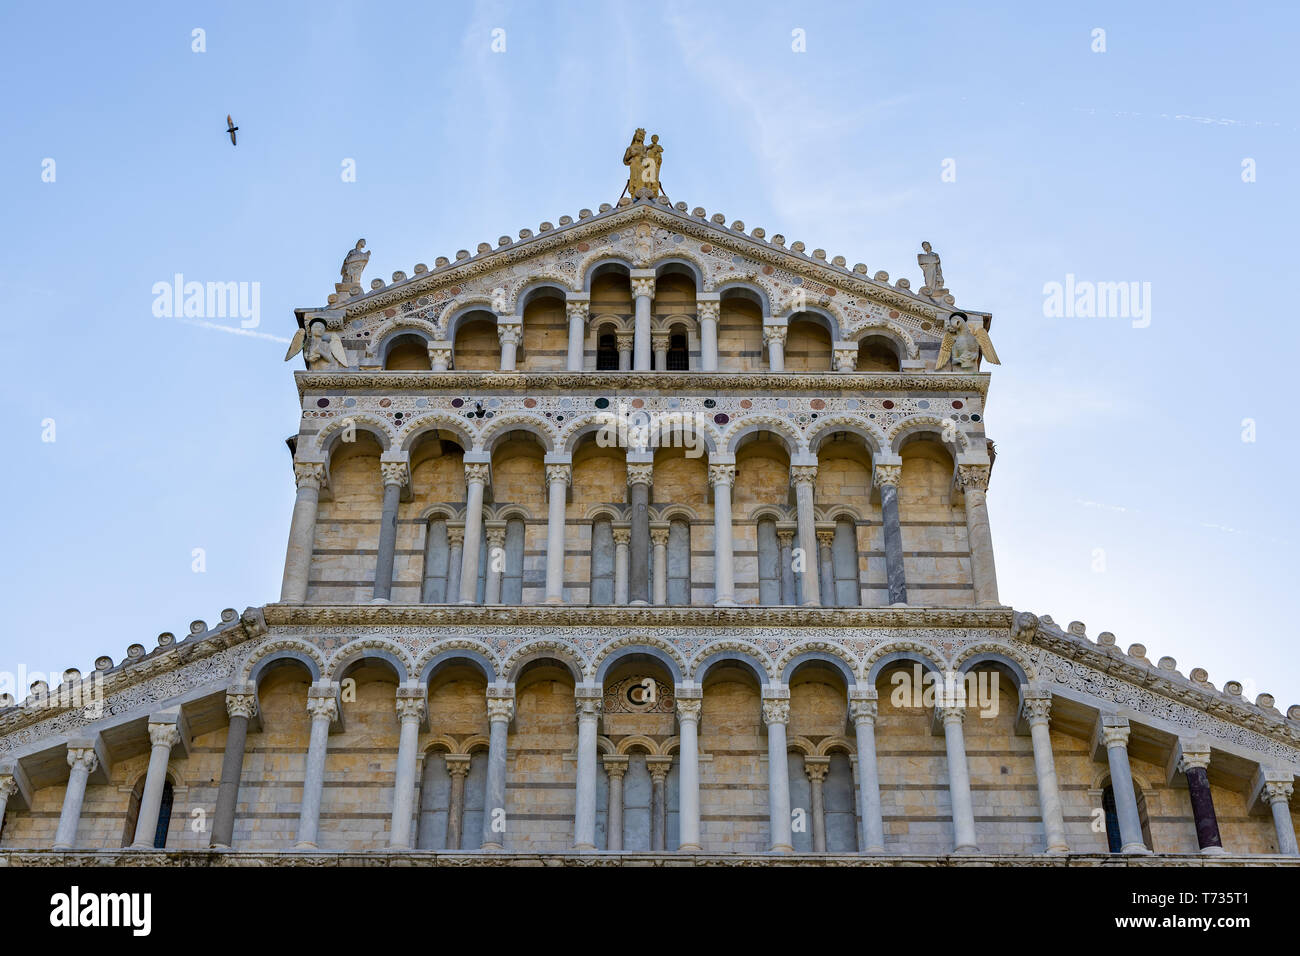 PISA, TUSCANY/ITALY  - APRIL 18 : Exterior view of the Cathedral  in Pisa Tuscany Italy on April 18, 2019 Stock Photo